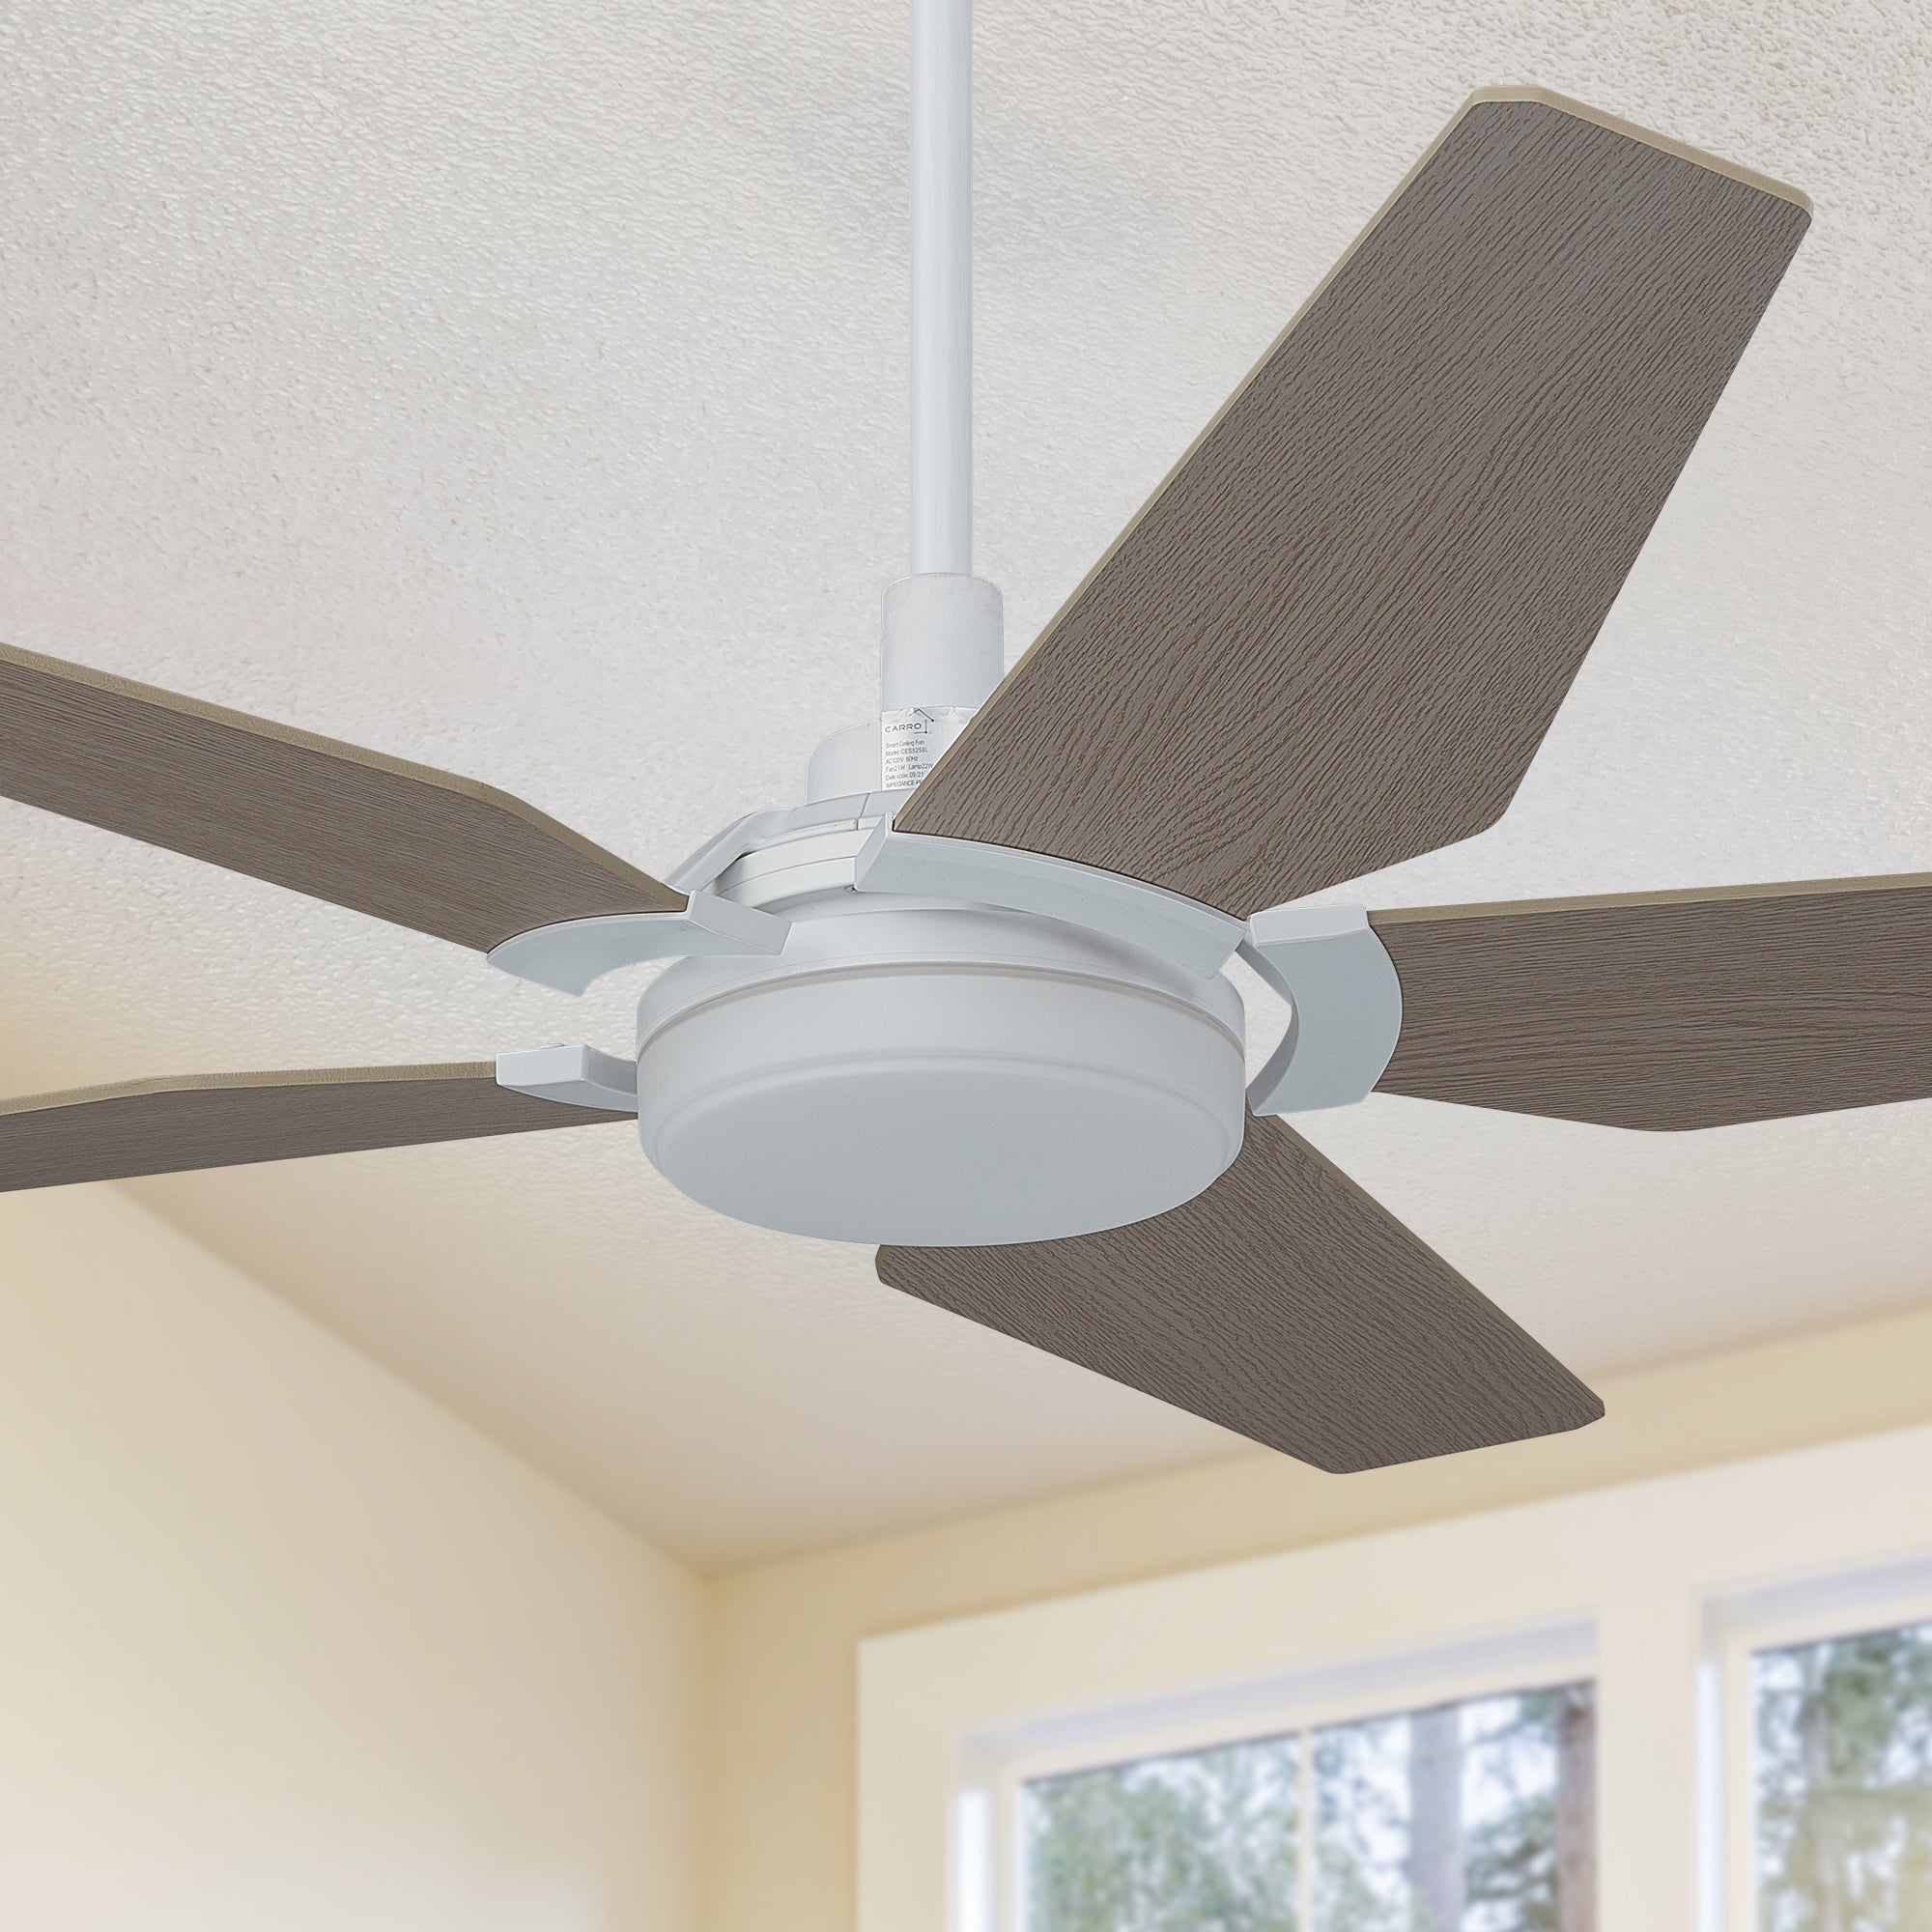 mafan Voyager 52 inch smart ceiling fan designs with light wood finish, elegant plywood blades, glass shade and has an integrated 4000K LED daylight. #color_Light-Wood